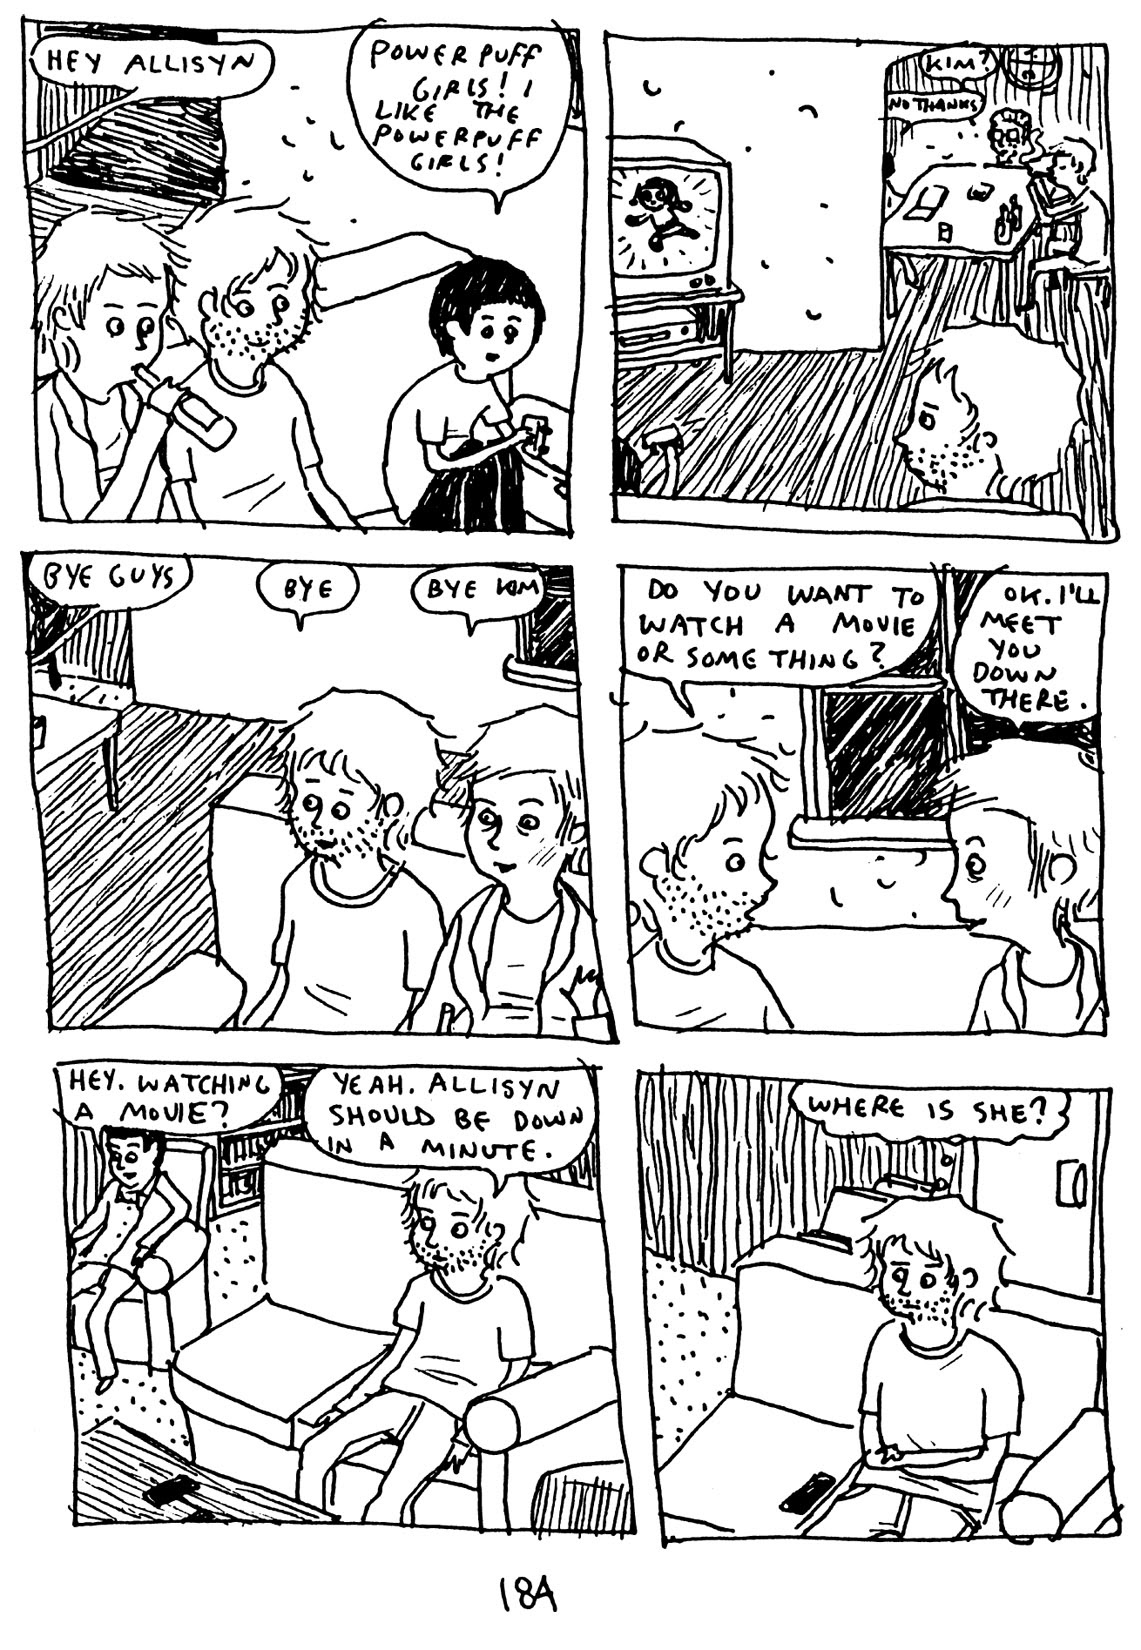 Read online Unlikely comic -  Issue # TPB (Part 2) - 99